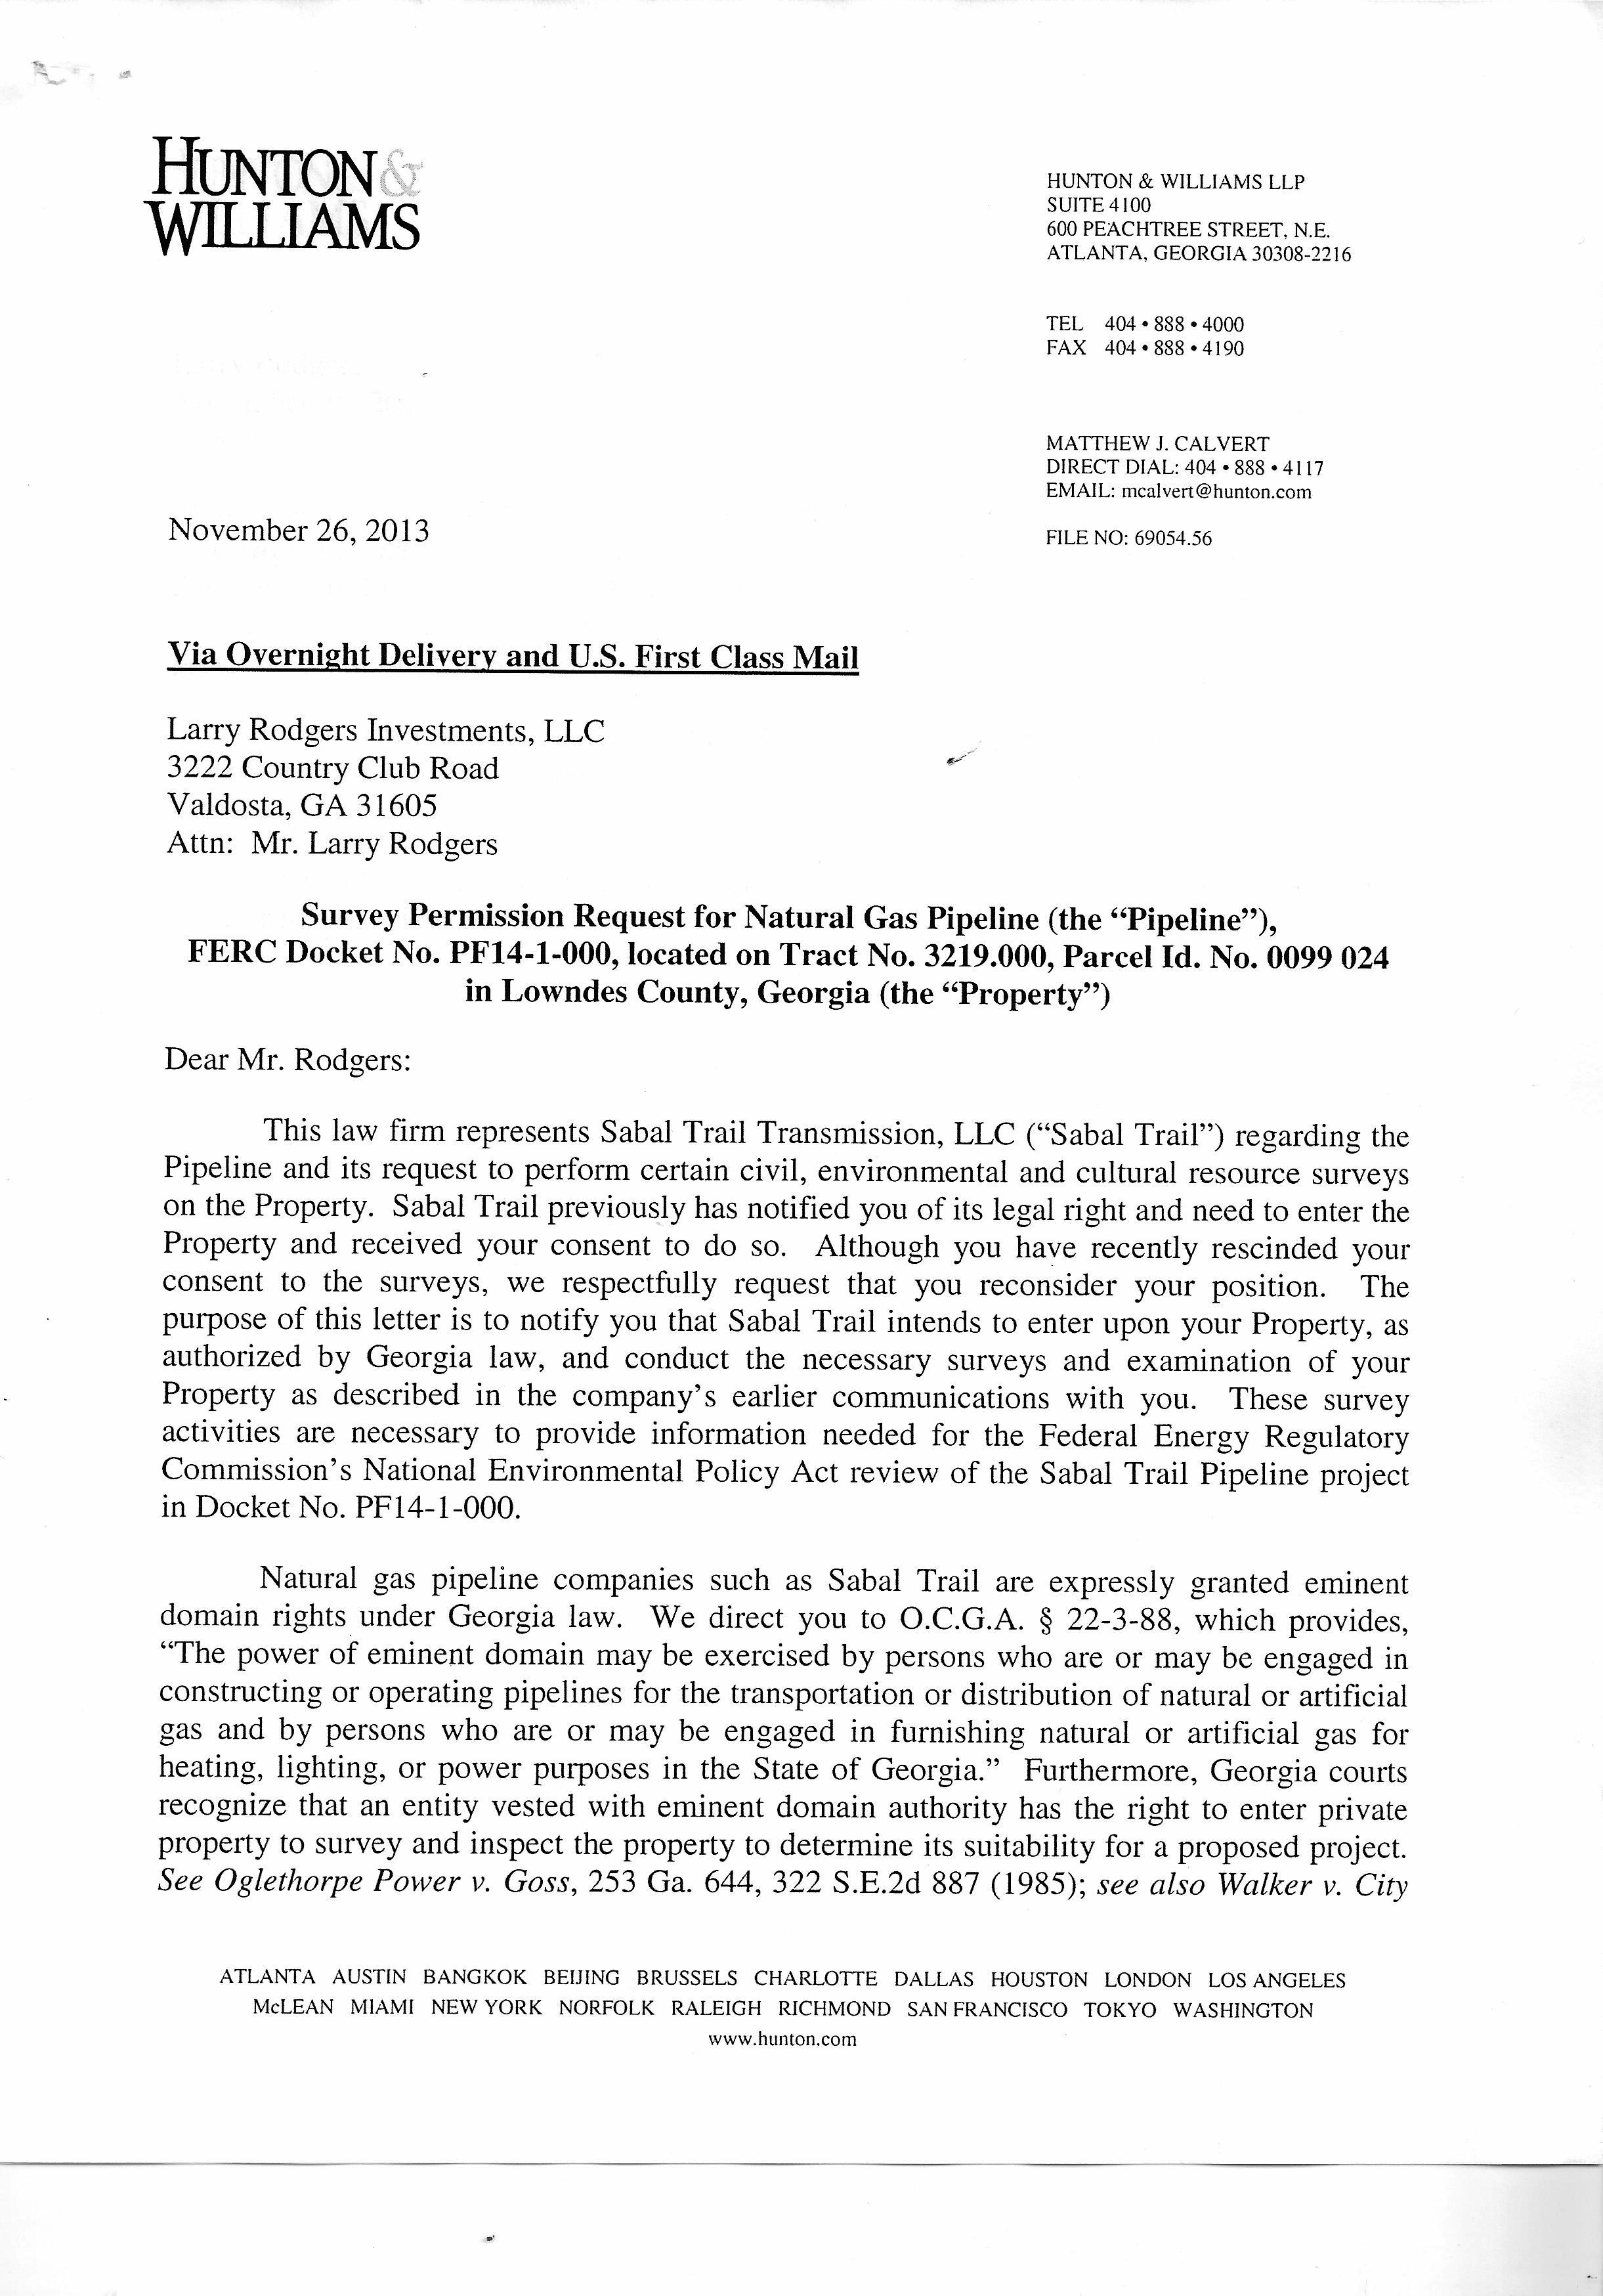 Page 1: the power of eminent domain, in Eminent domain letter from Sabal Trail attorney, by Larry Rodgers Investments, for Spectrabusters.org, 26 November 2013